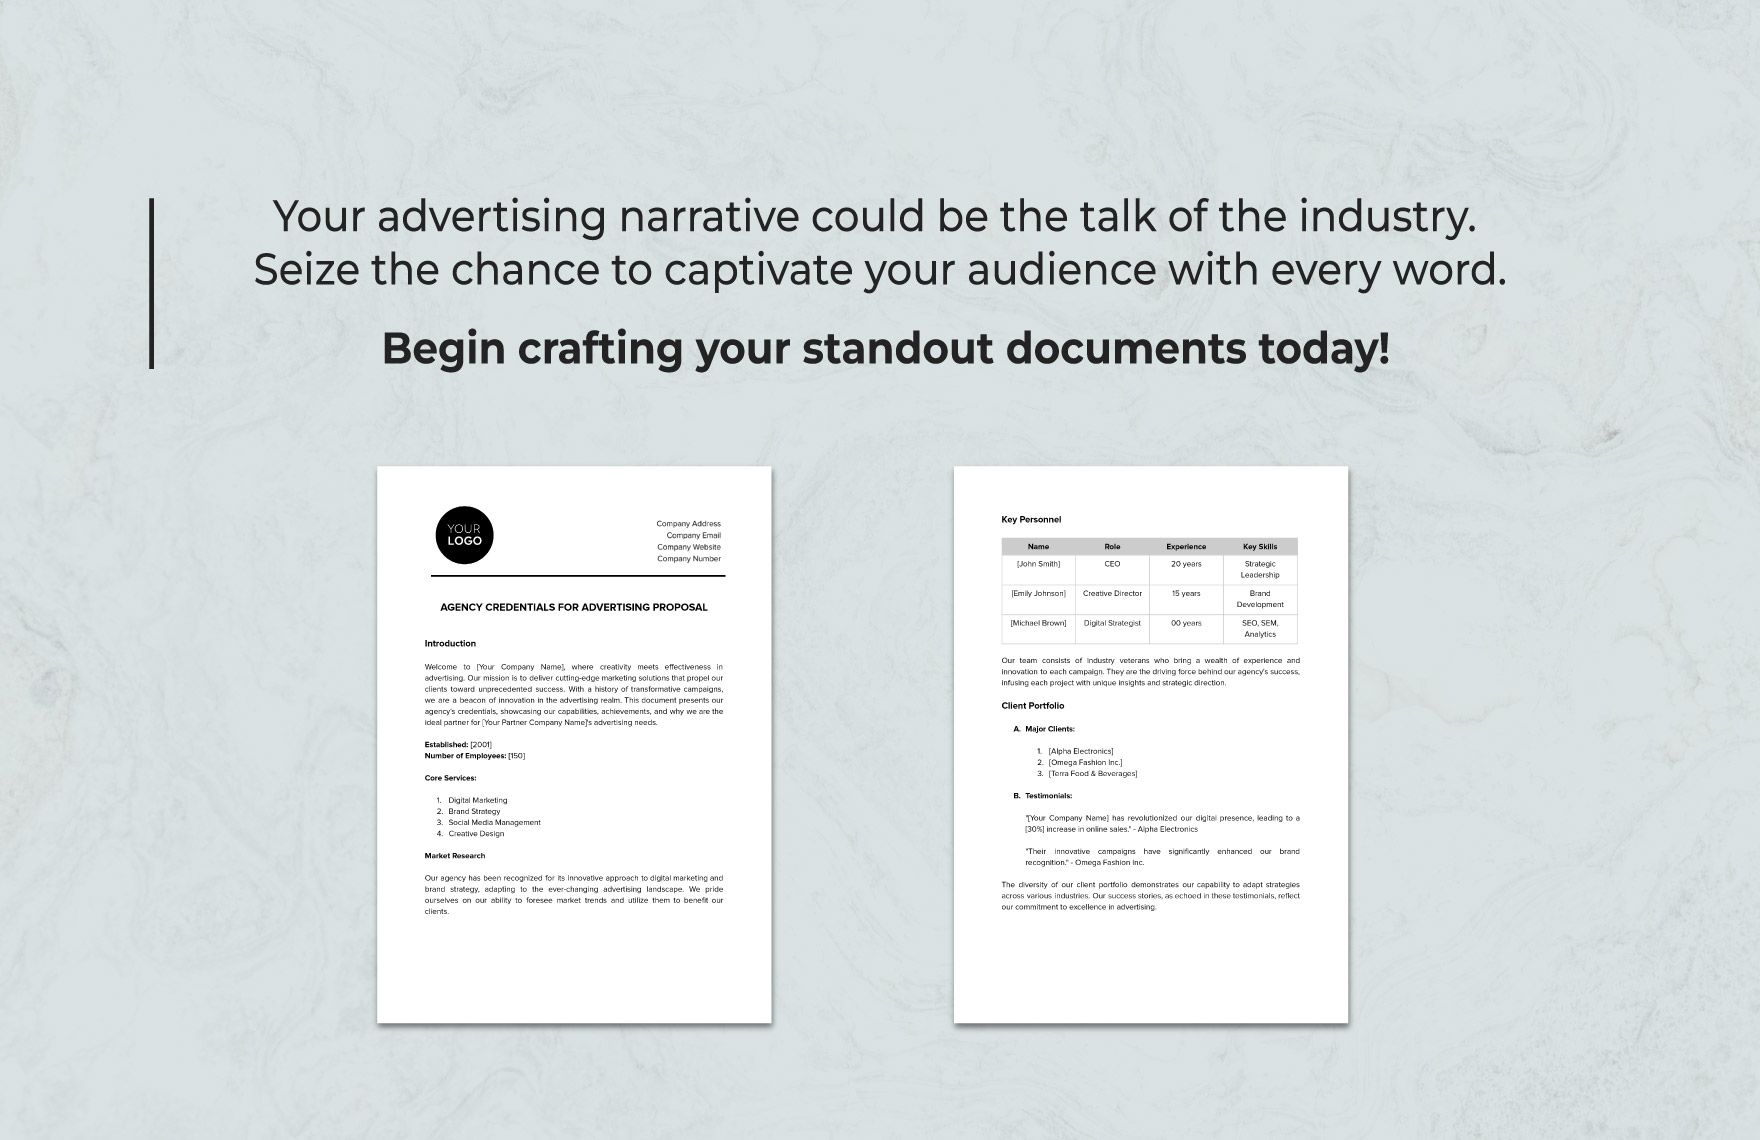 Agency Credentials for Advertising Proposals Template